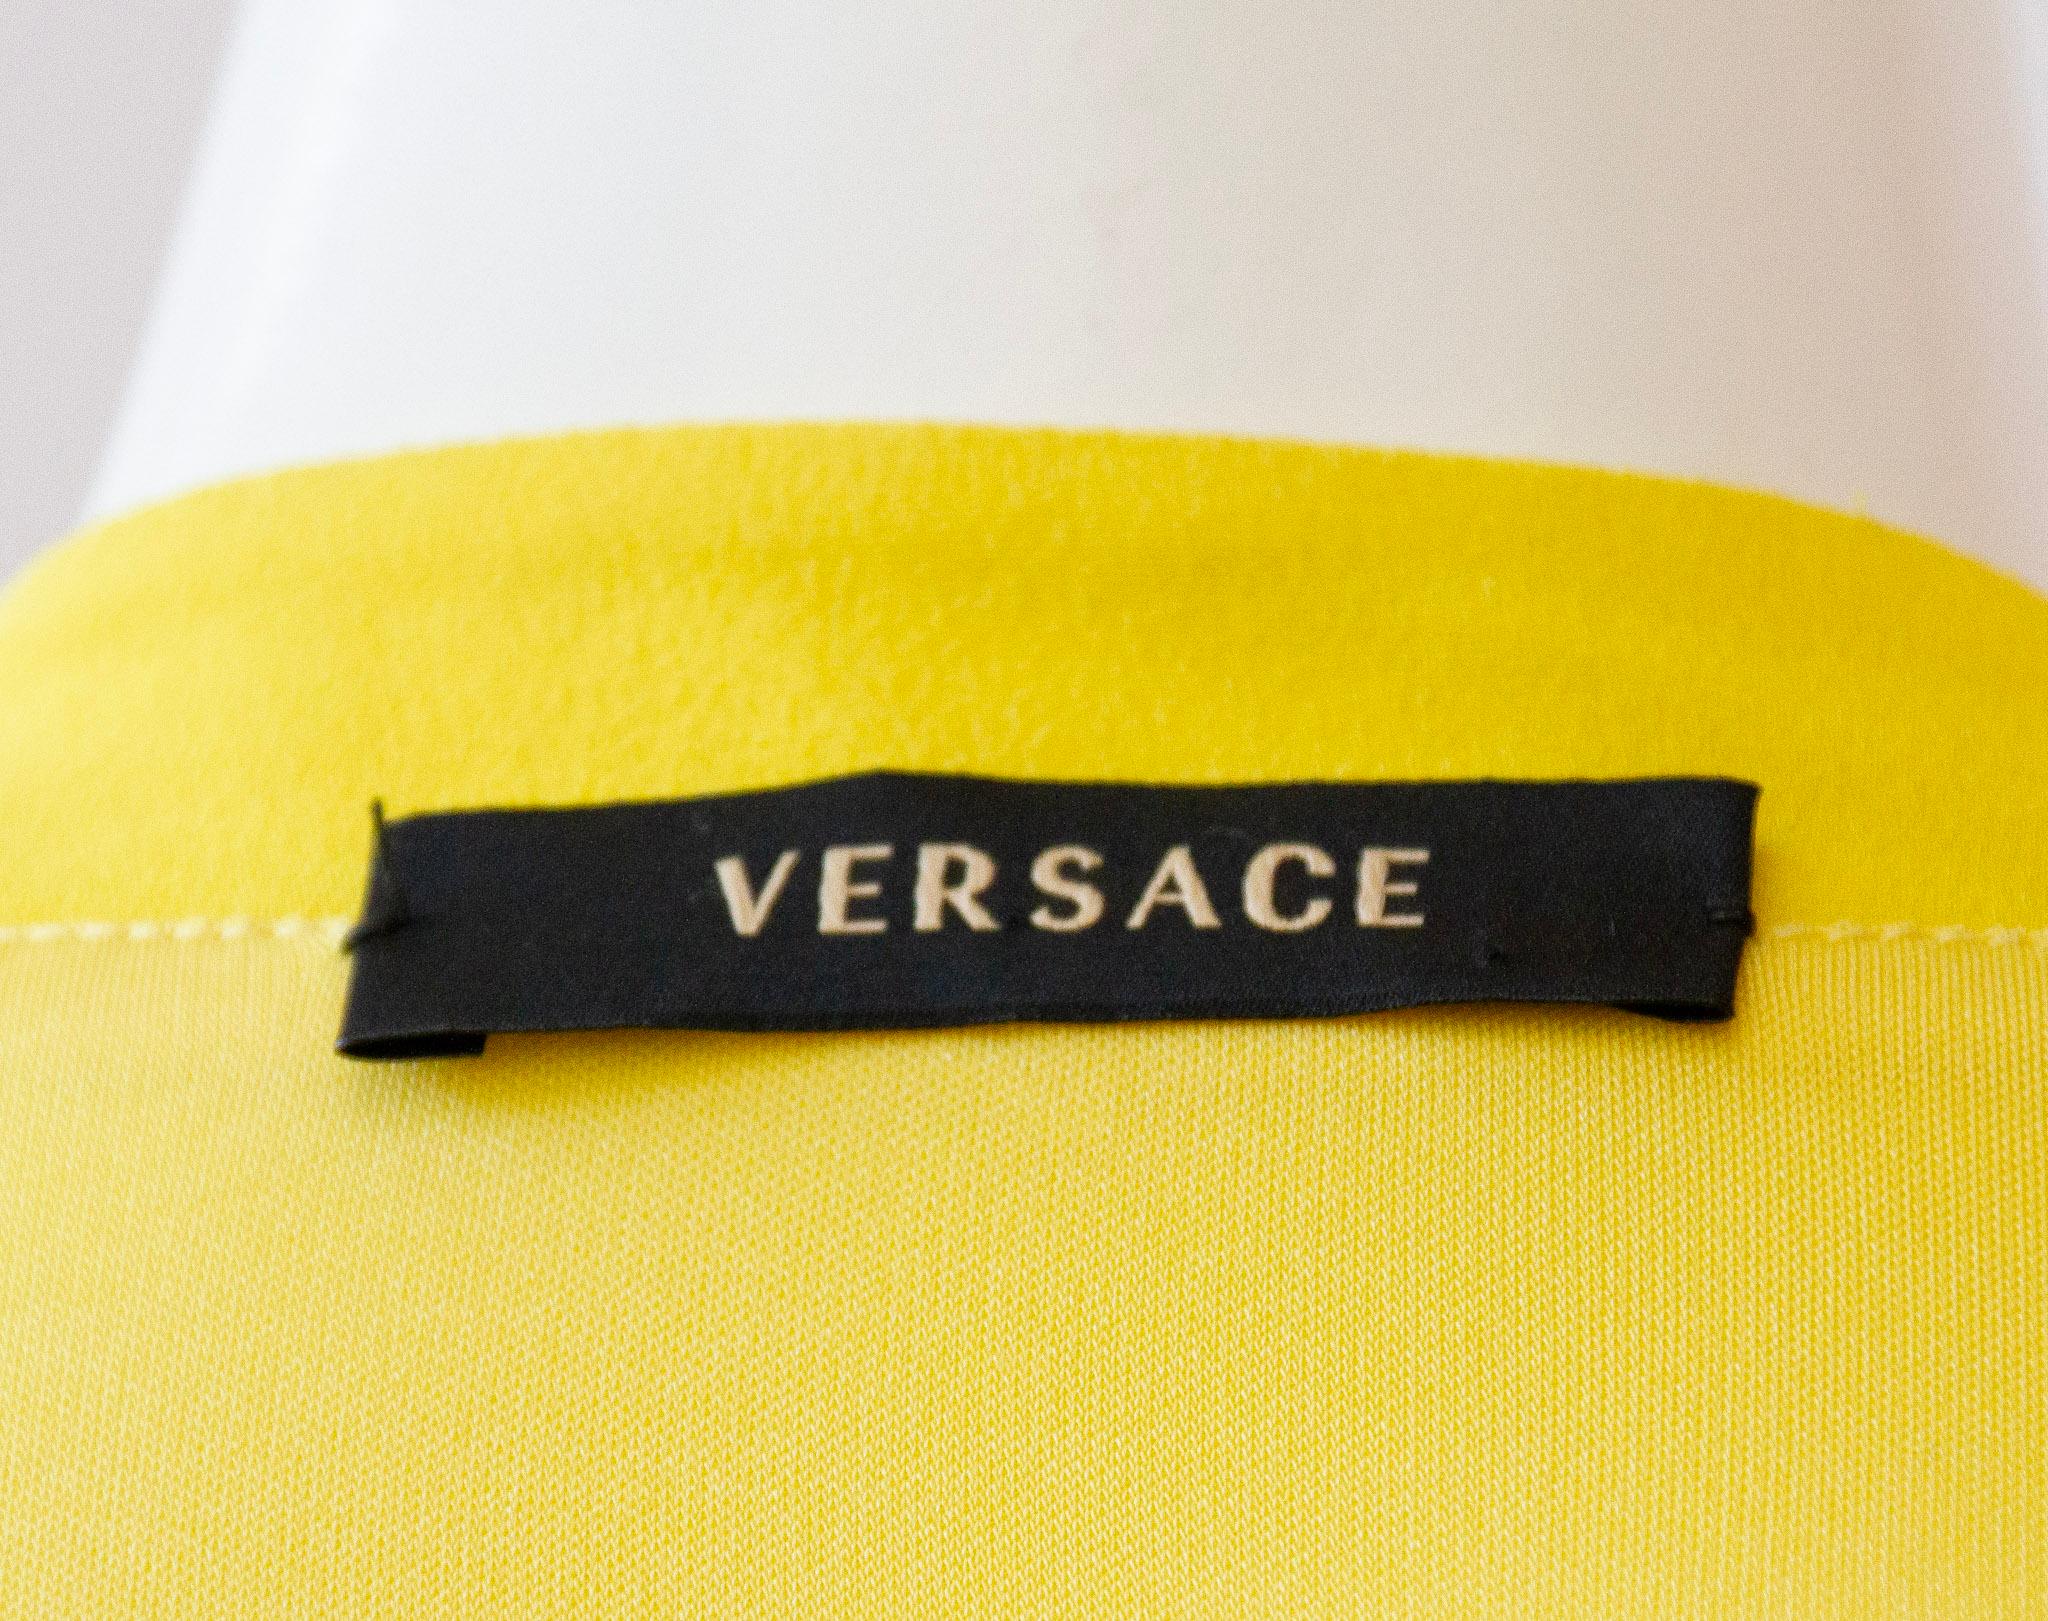 GIANNI VERSACE, Canary Yellow Mid-Length Wrap Dress with Iconic Medusa Fastener For Sale 4